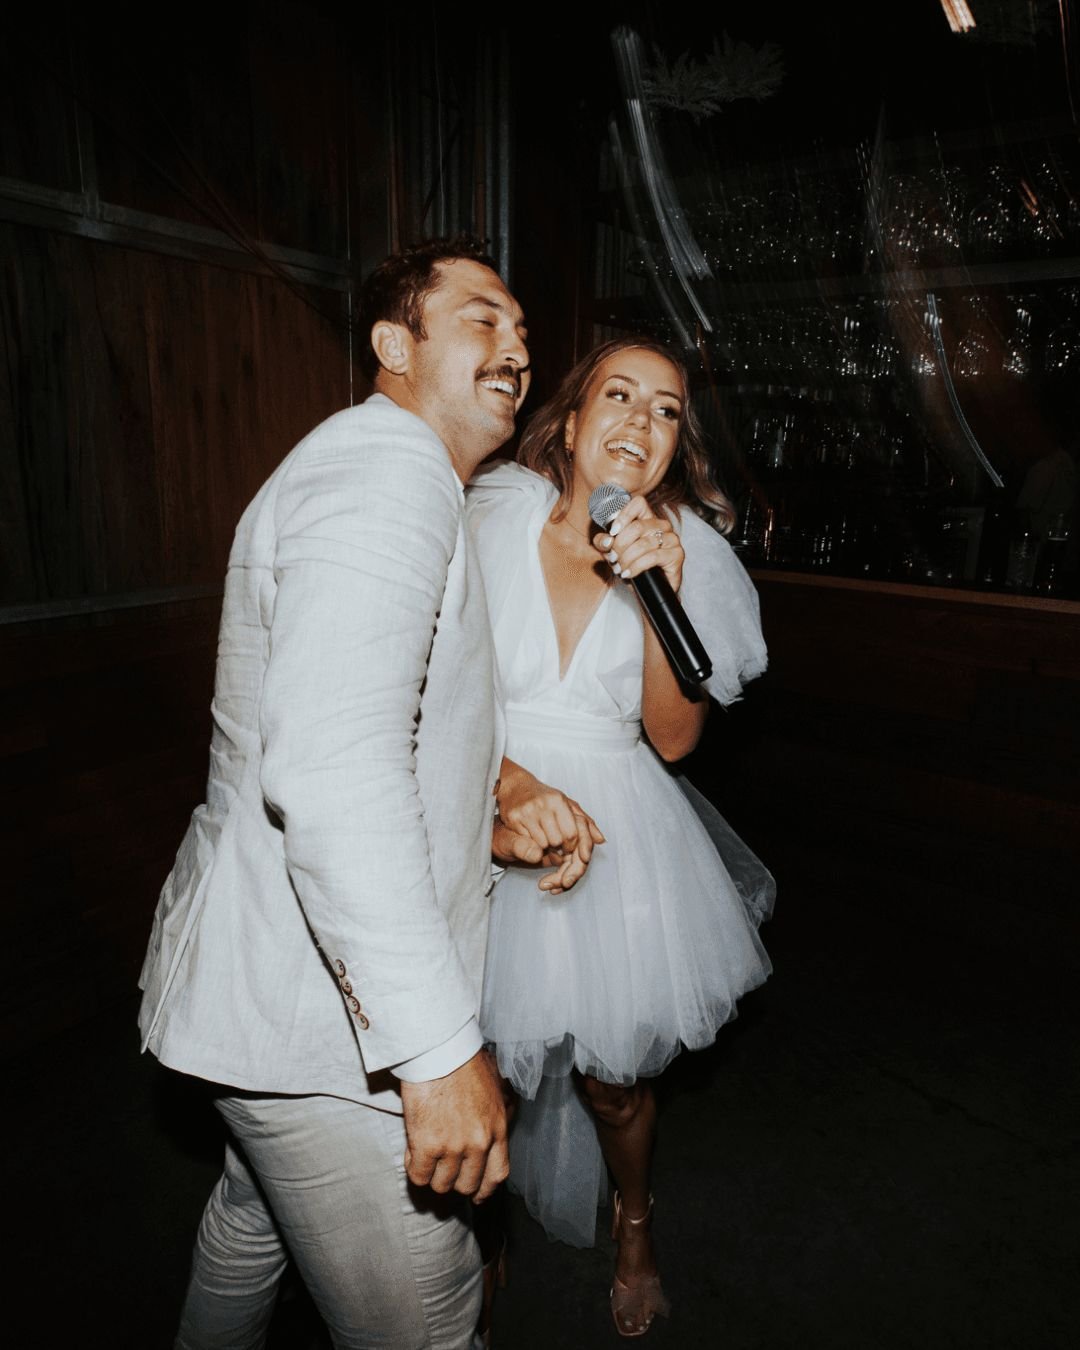 &quot;Strike a chord, sing a song 🎶✨ &ndash; Ruby and Adam bringing their own soundtrack to love! Witnessing these two serenade their guests was like watching a live romance unfold. Their melody? Pure joy. Their lyrics? All heart. 🎤💑 #CoupleGoals 